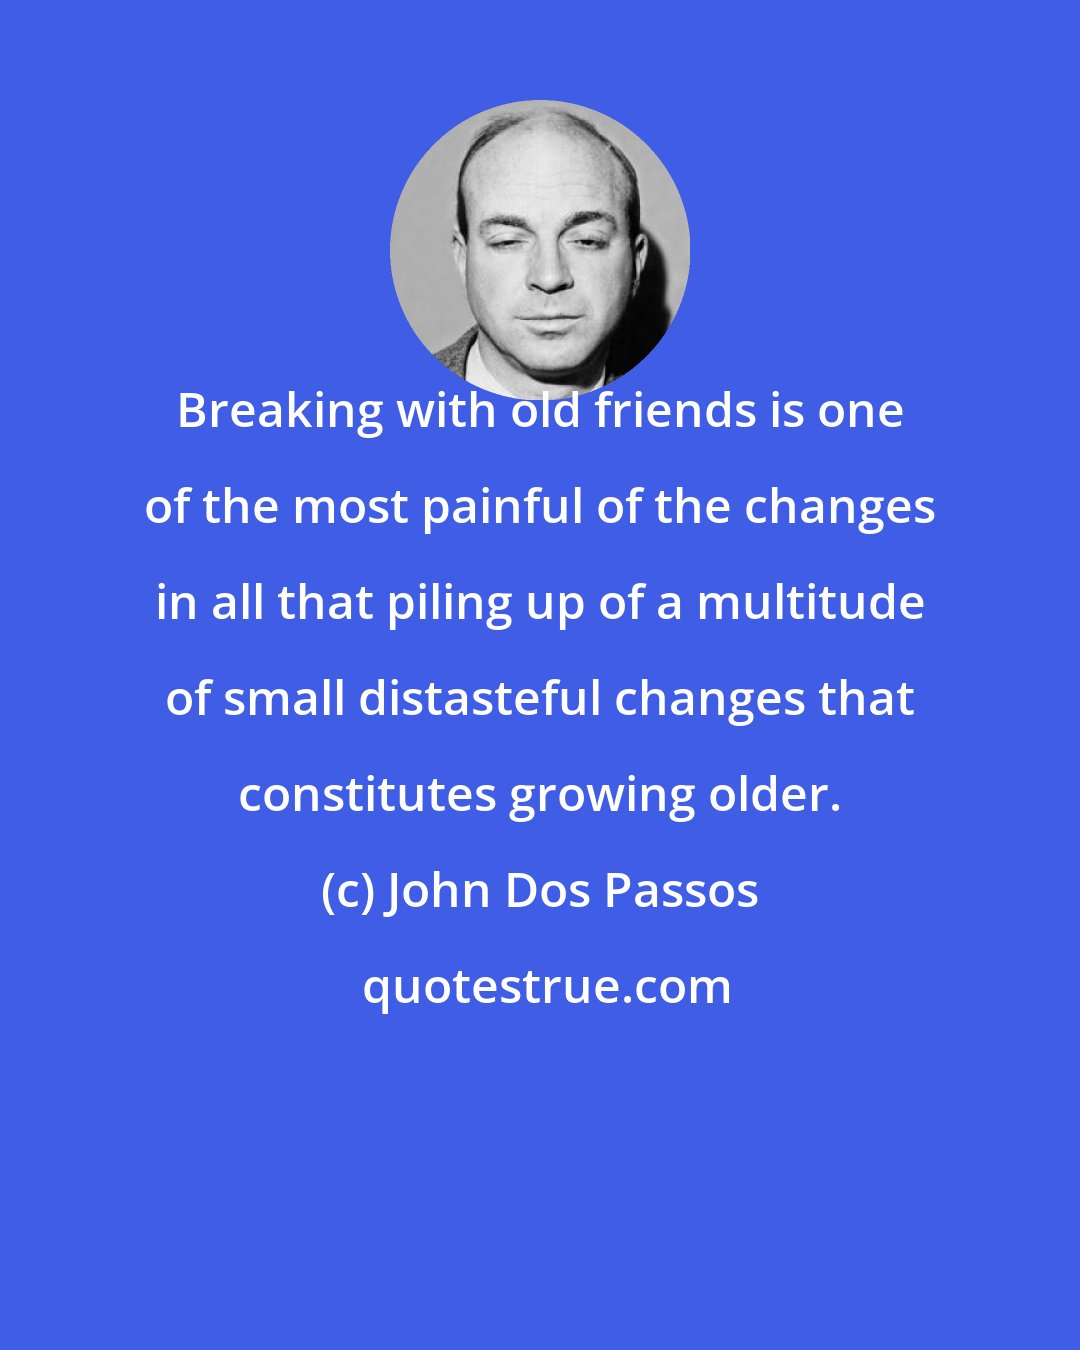 John Dos Passos: Breaking with old friends is one of the most painful of the changes in all that piling up of a multitude of small distasteful changes that constitutes growing older.